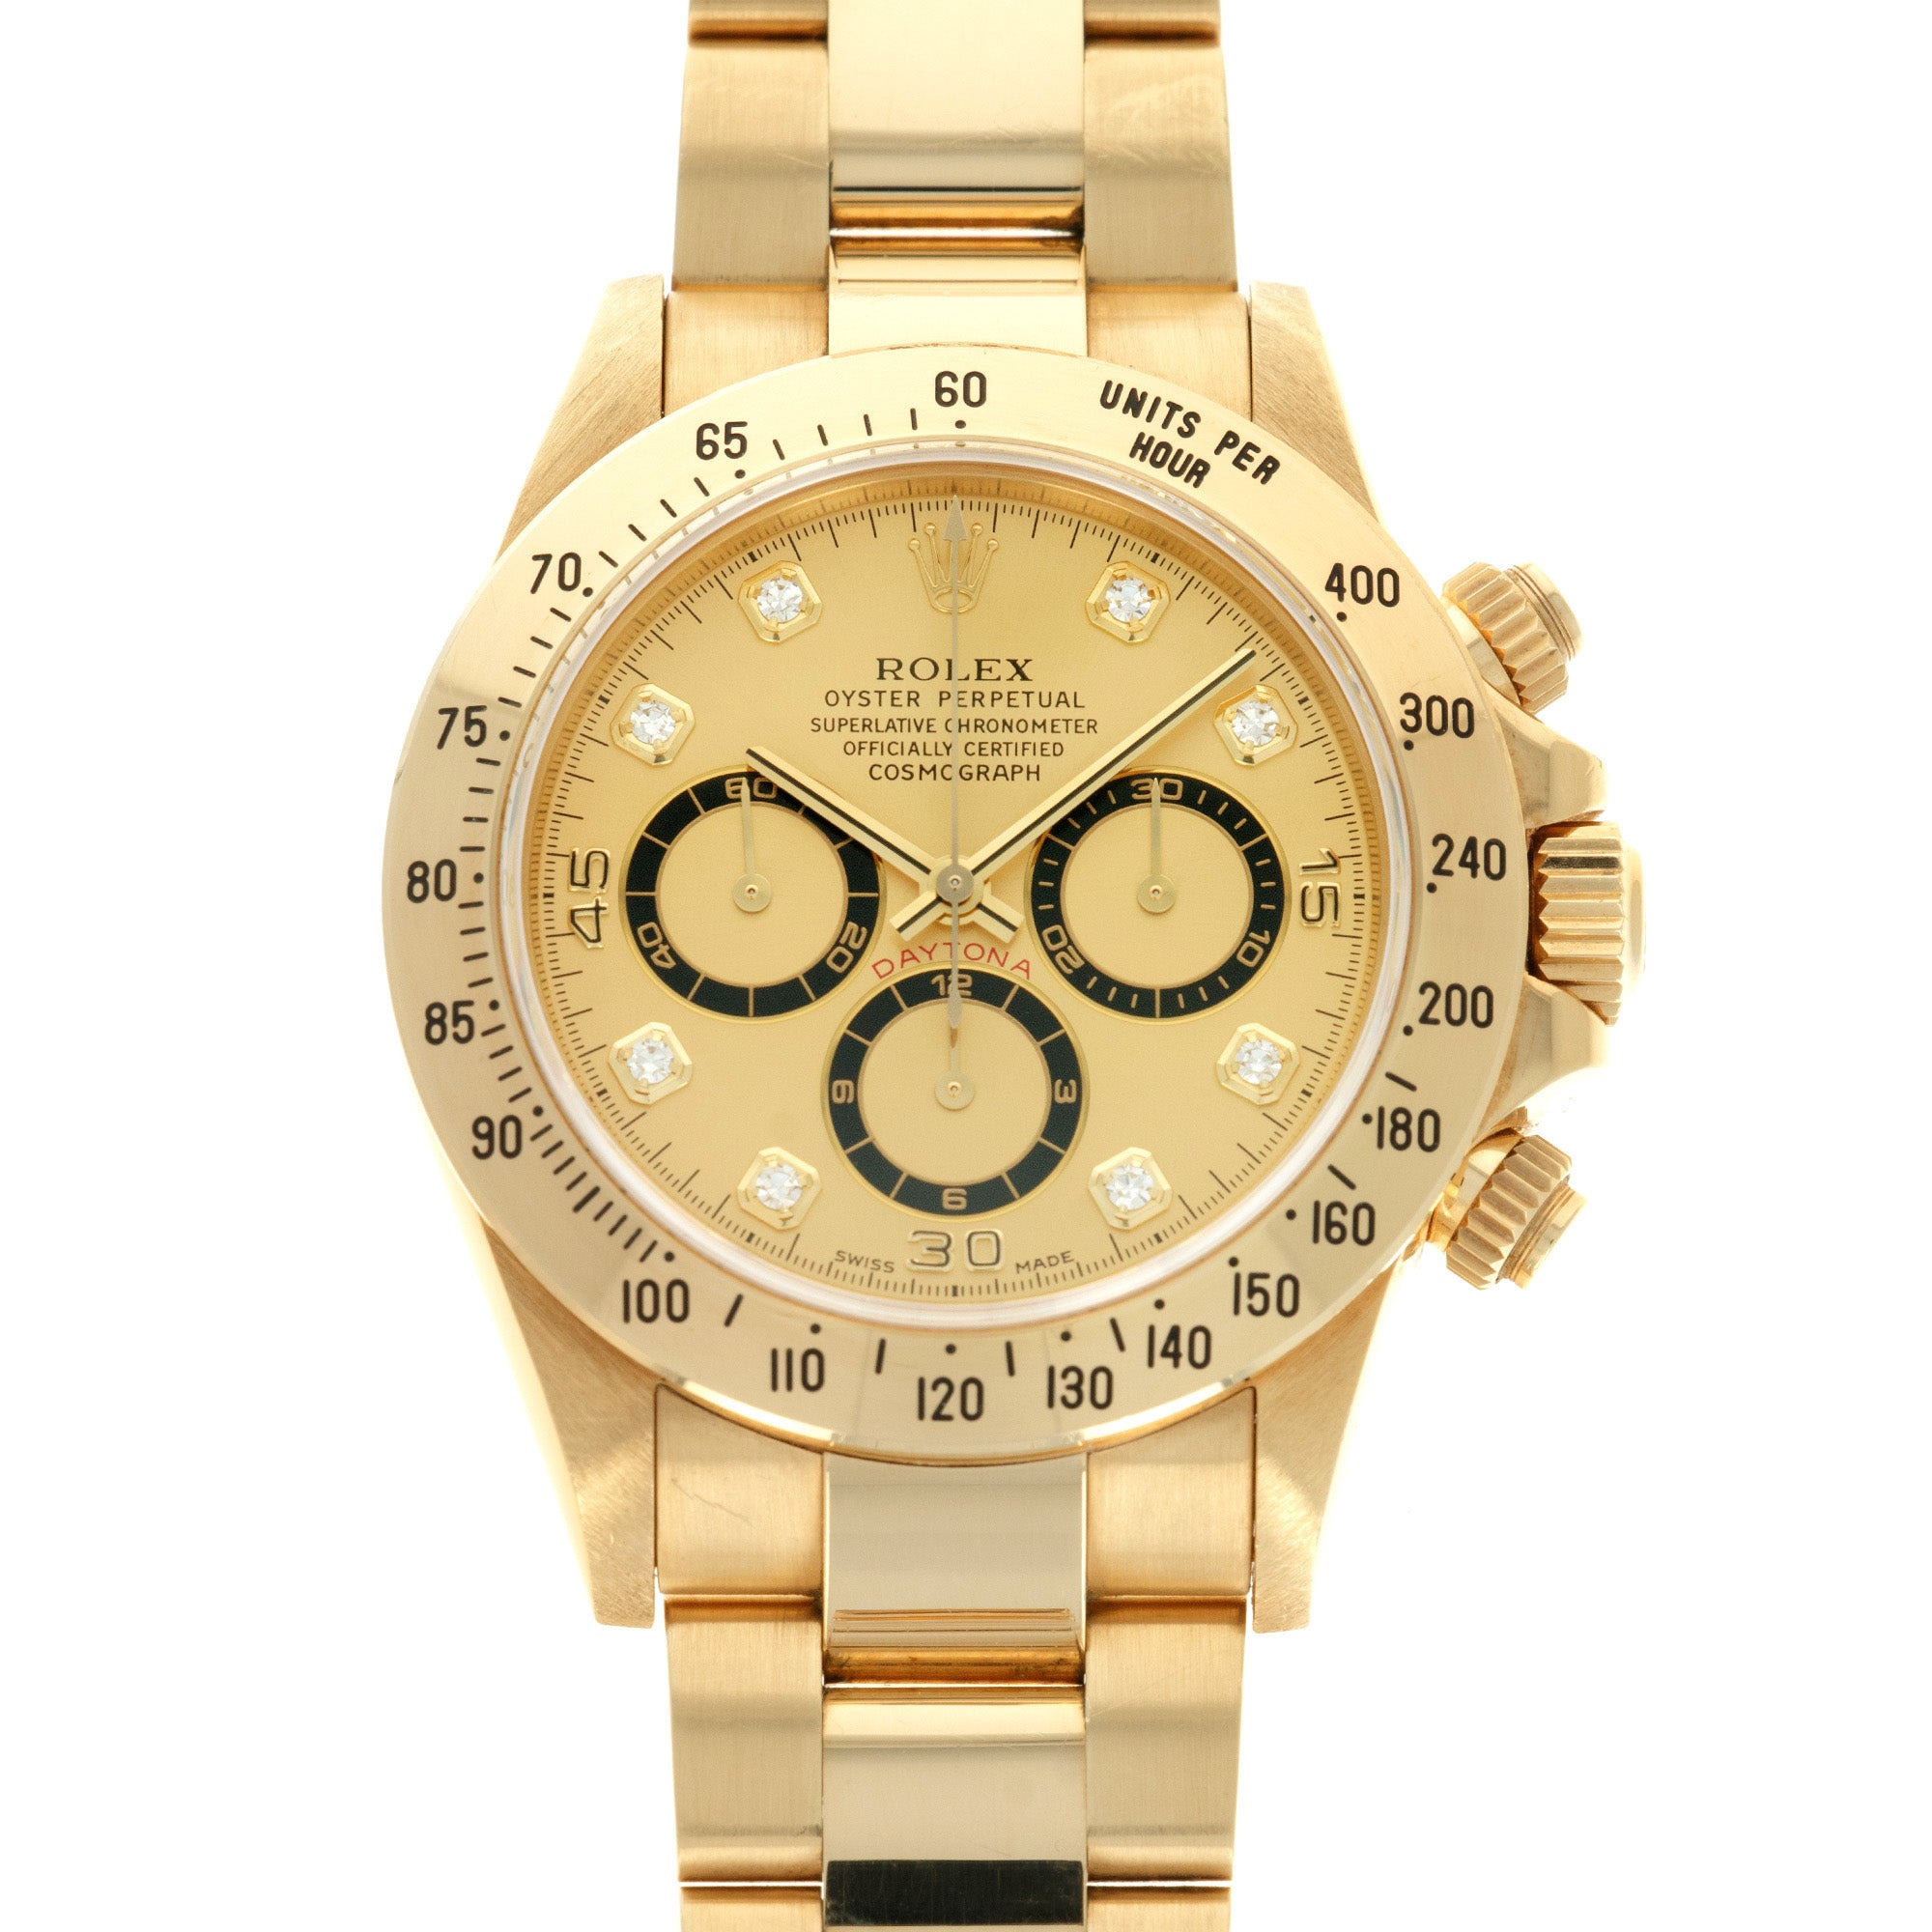 Rolex - Rolex Yellow Gold Cosmograph Daytona Zenith Watch Ref. 16528 with Original Box and Papers - The Keystone Watches